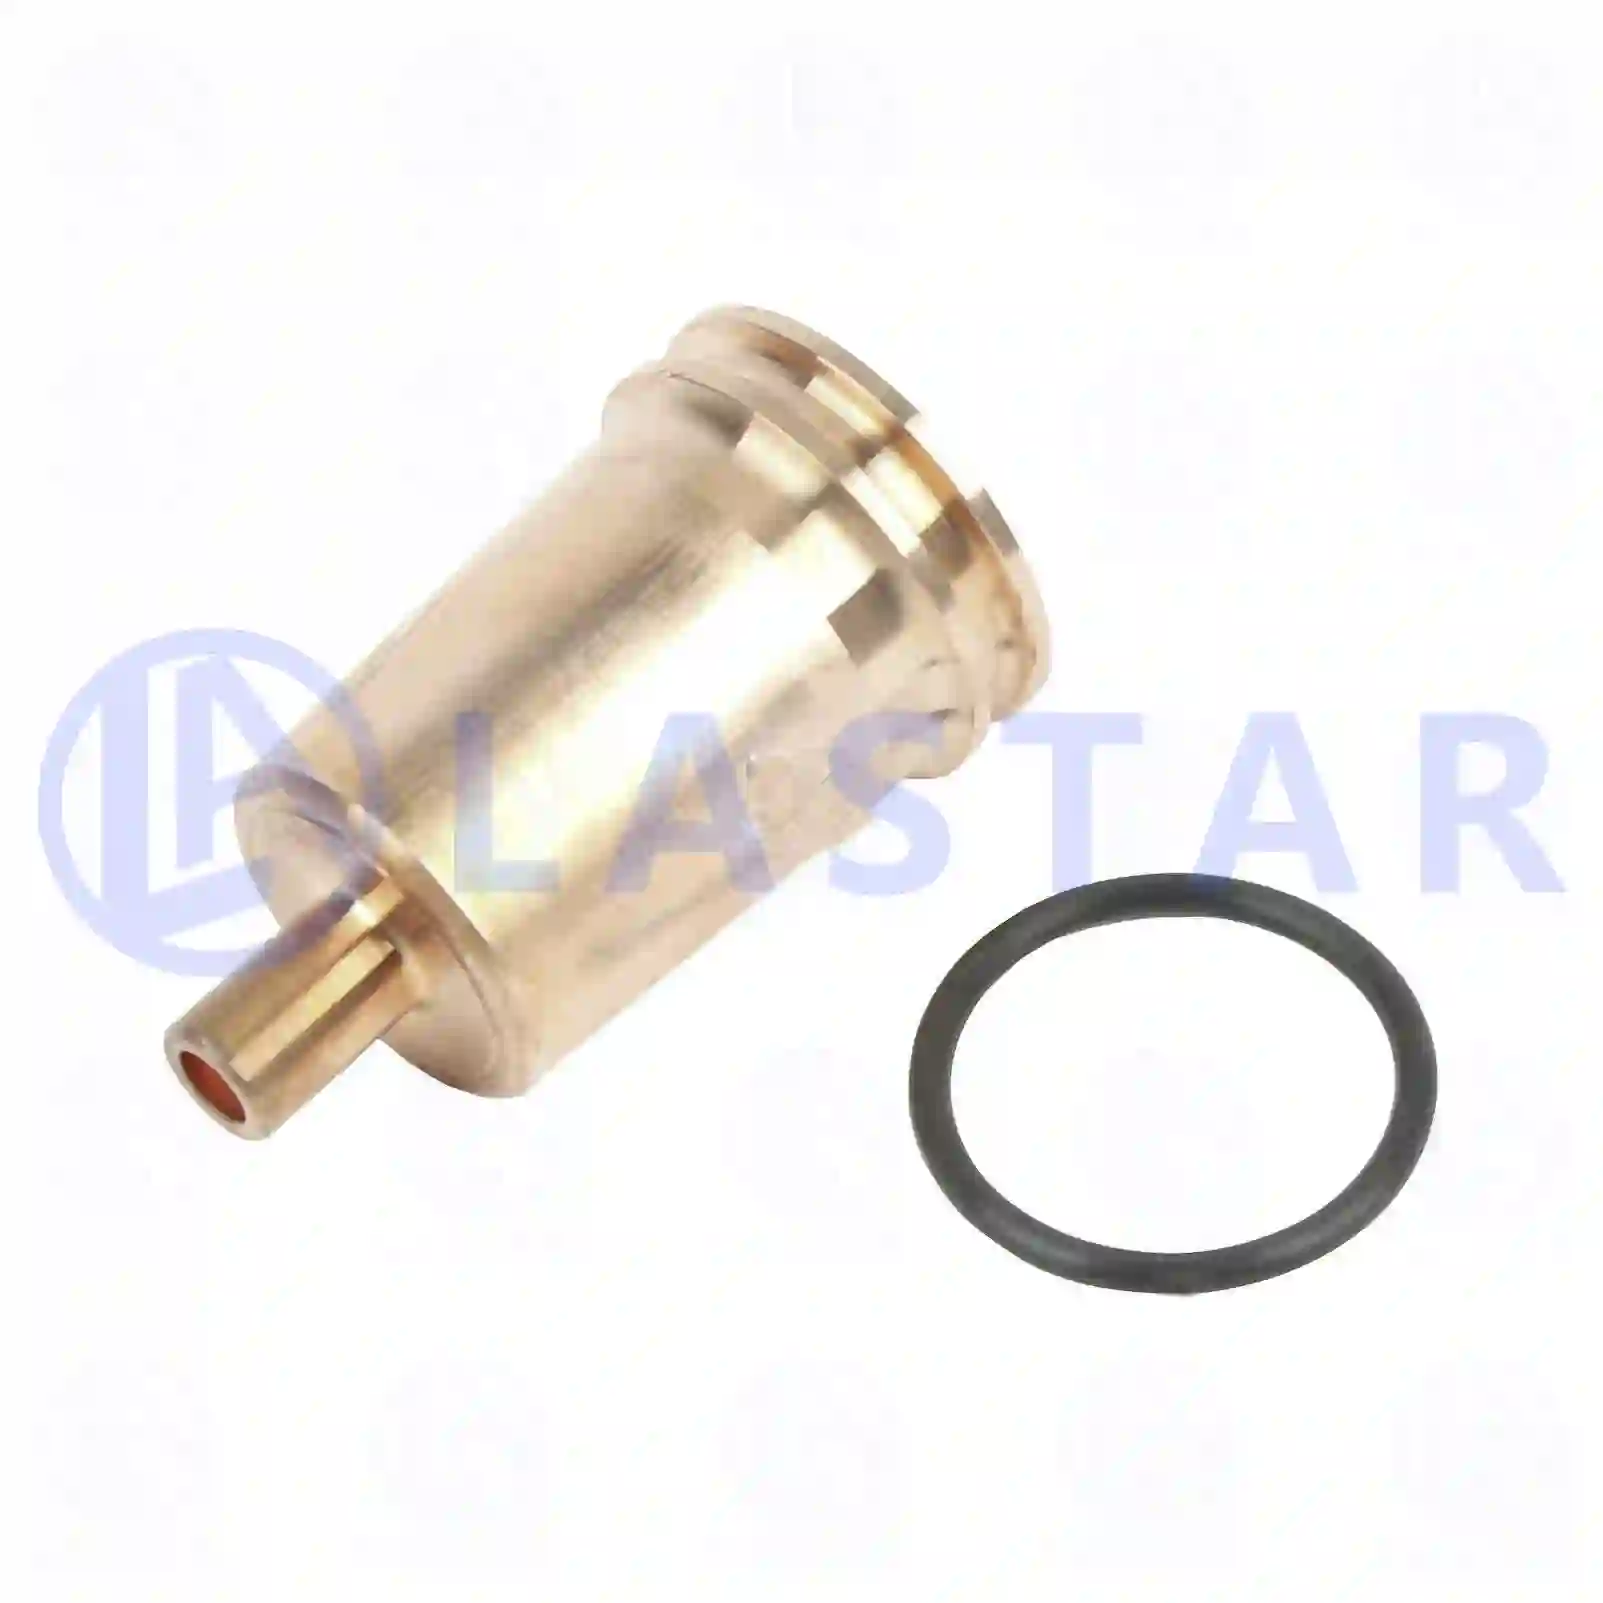  Injection sleeve kit || Lastar Spare Part | Truck Spare Parts, Auotomotive Spare Parts